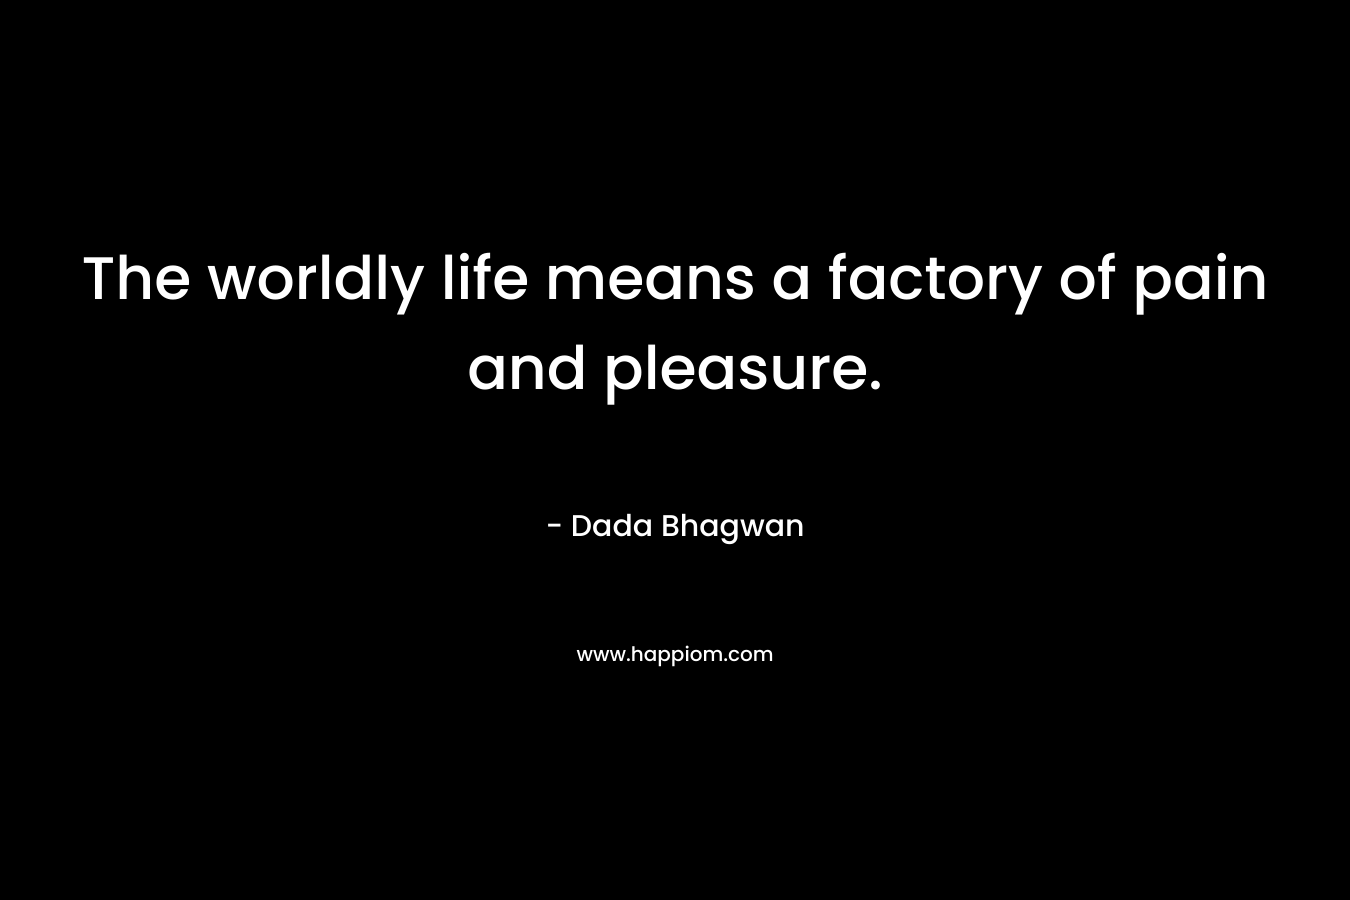 The worldly life means a factory of pain and pleasure. – Dada Bhagwan